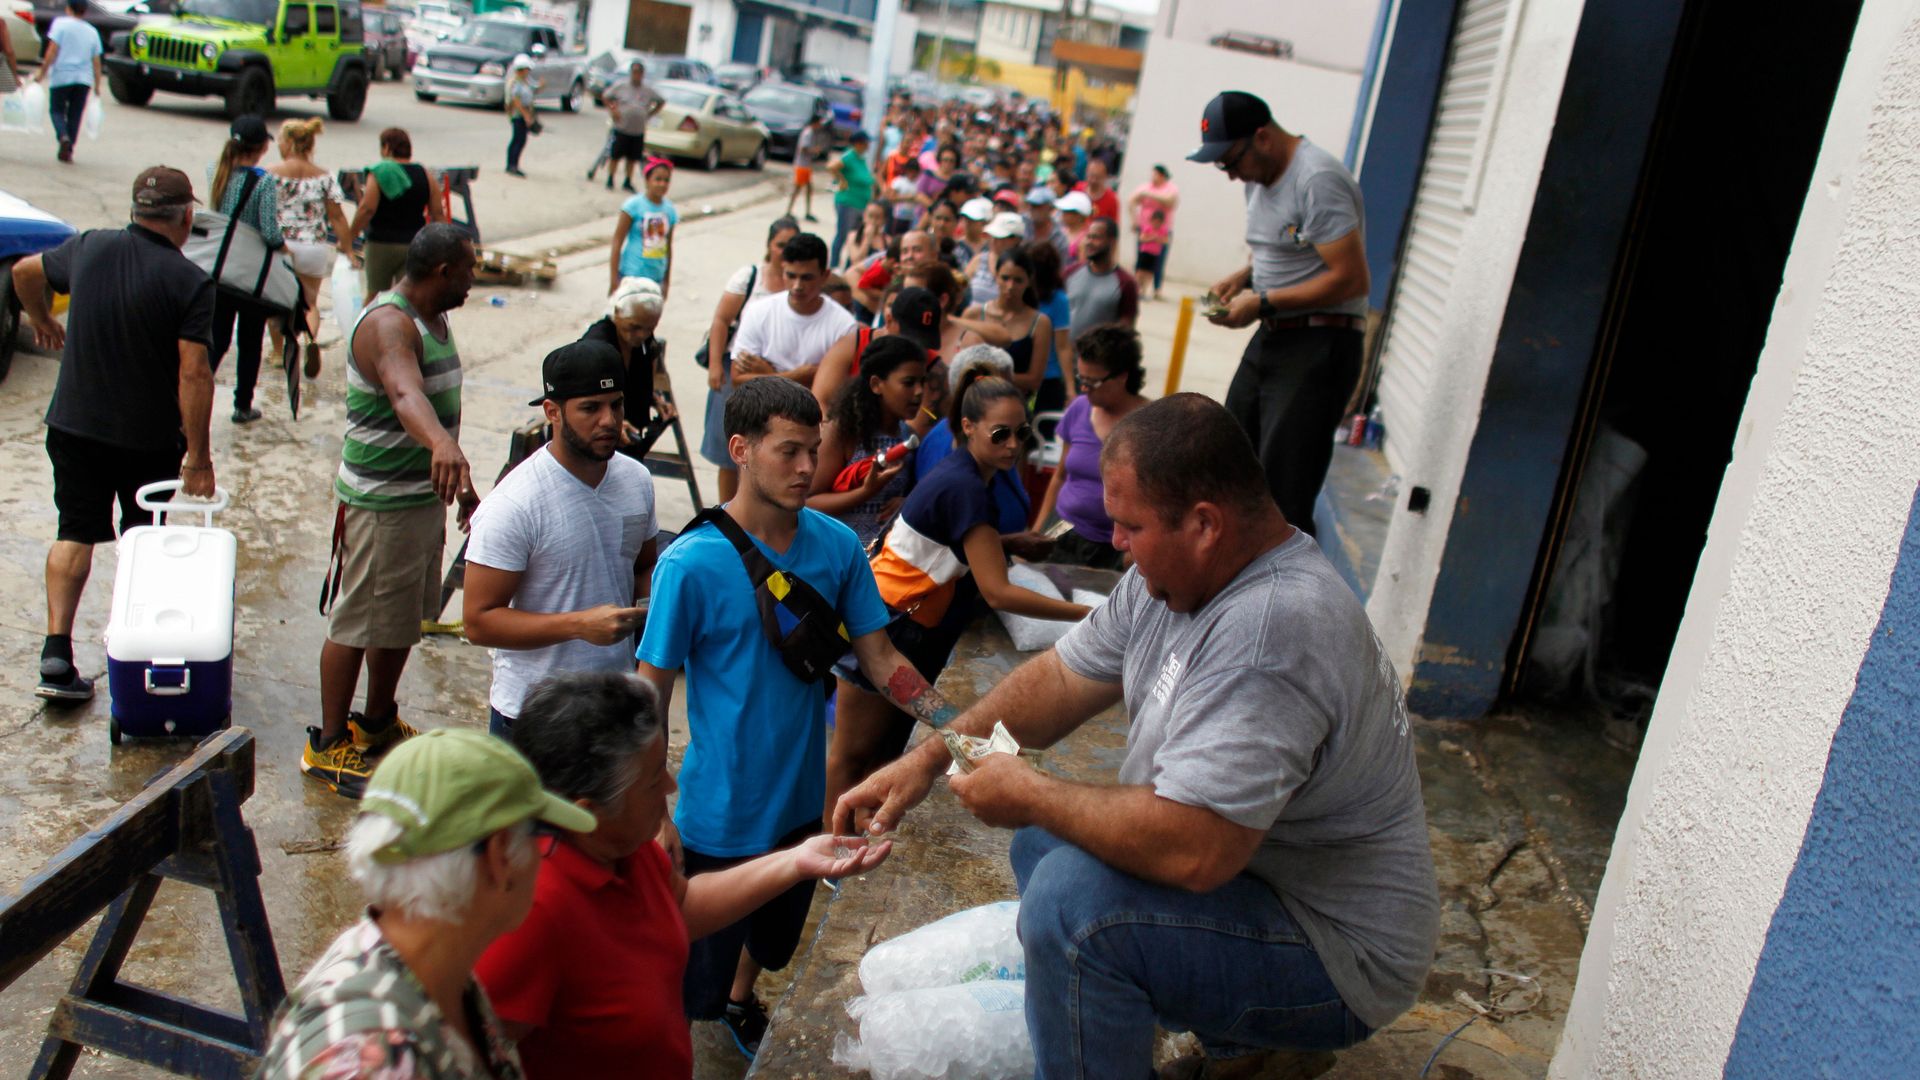 Puerto Ricans line up to purchase ice